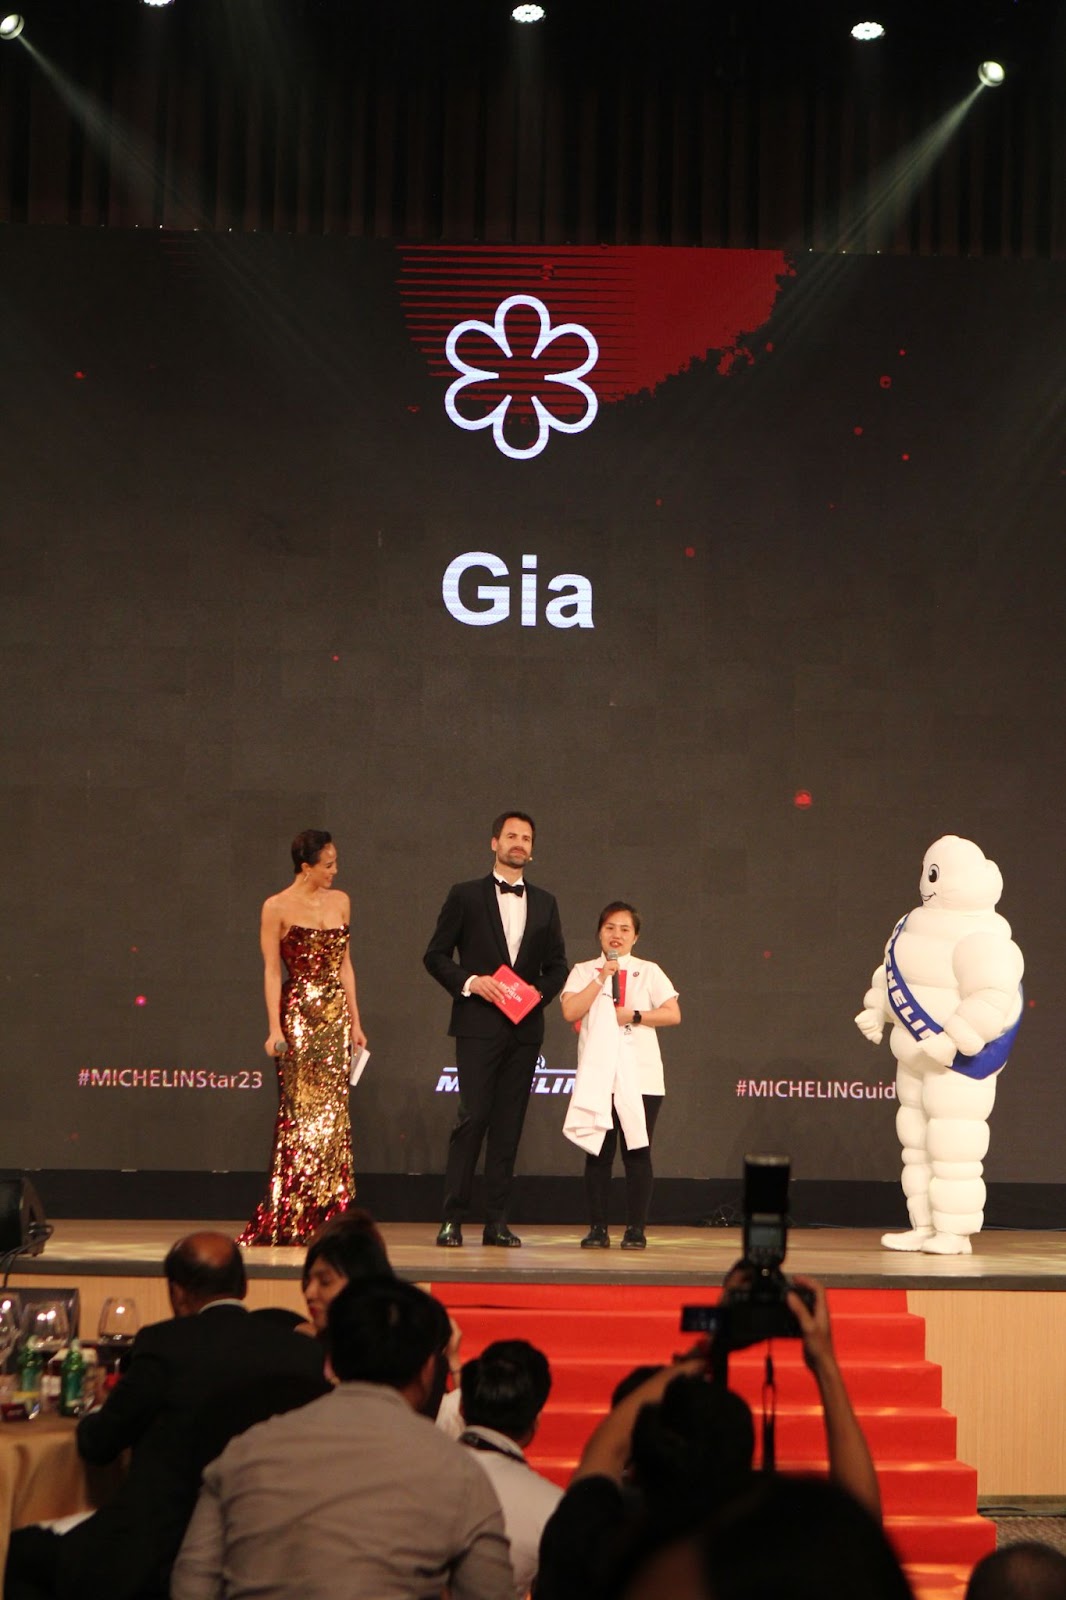 Gia Restaurant received One Star Michelin